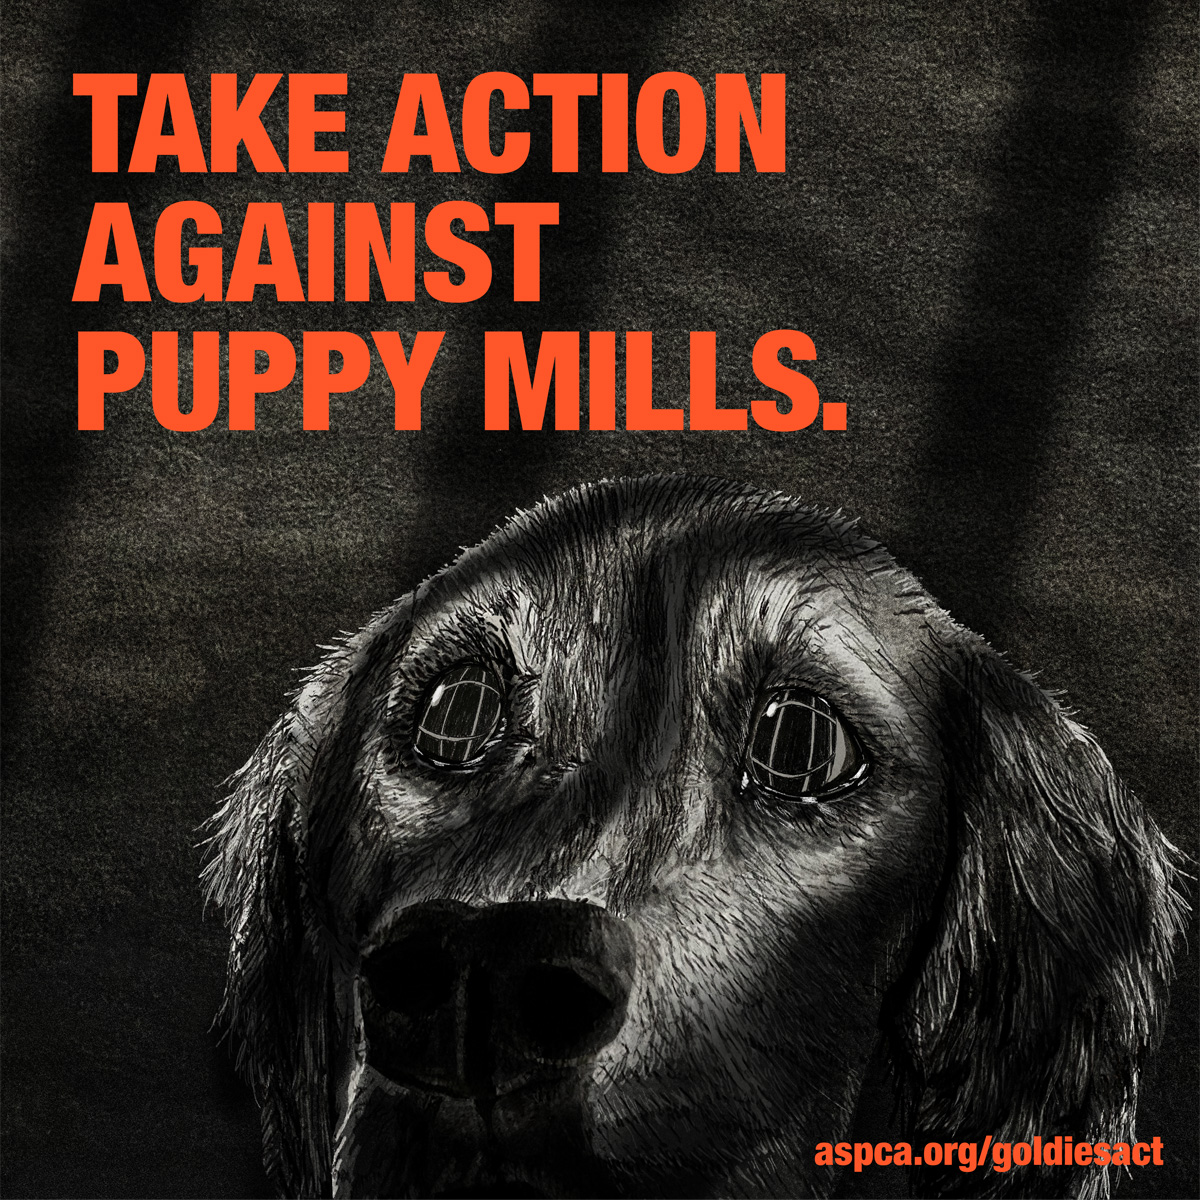 Goldie's Act Illustration of a dog's face: TAKE ACTION AGAINST PUPPPY MILLS. - aspca.org/GoldiesAct